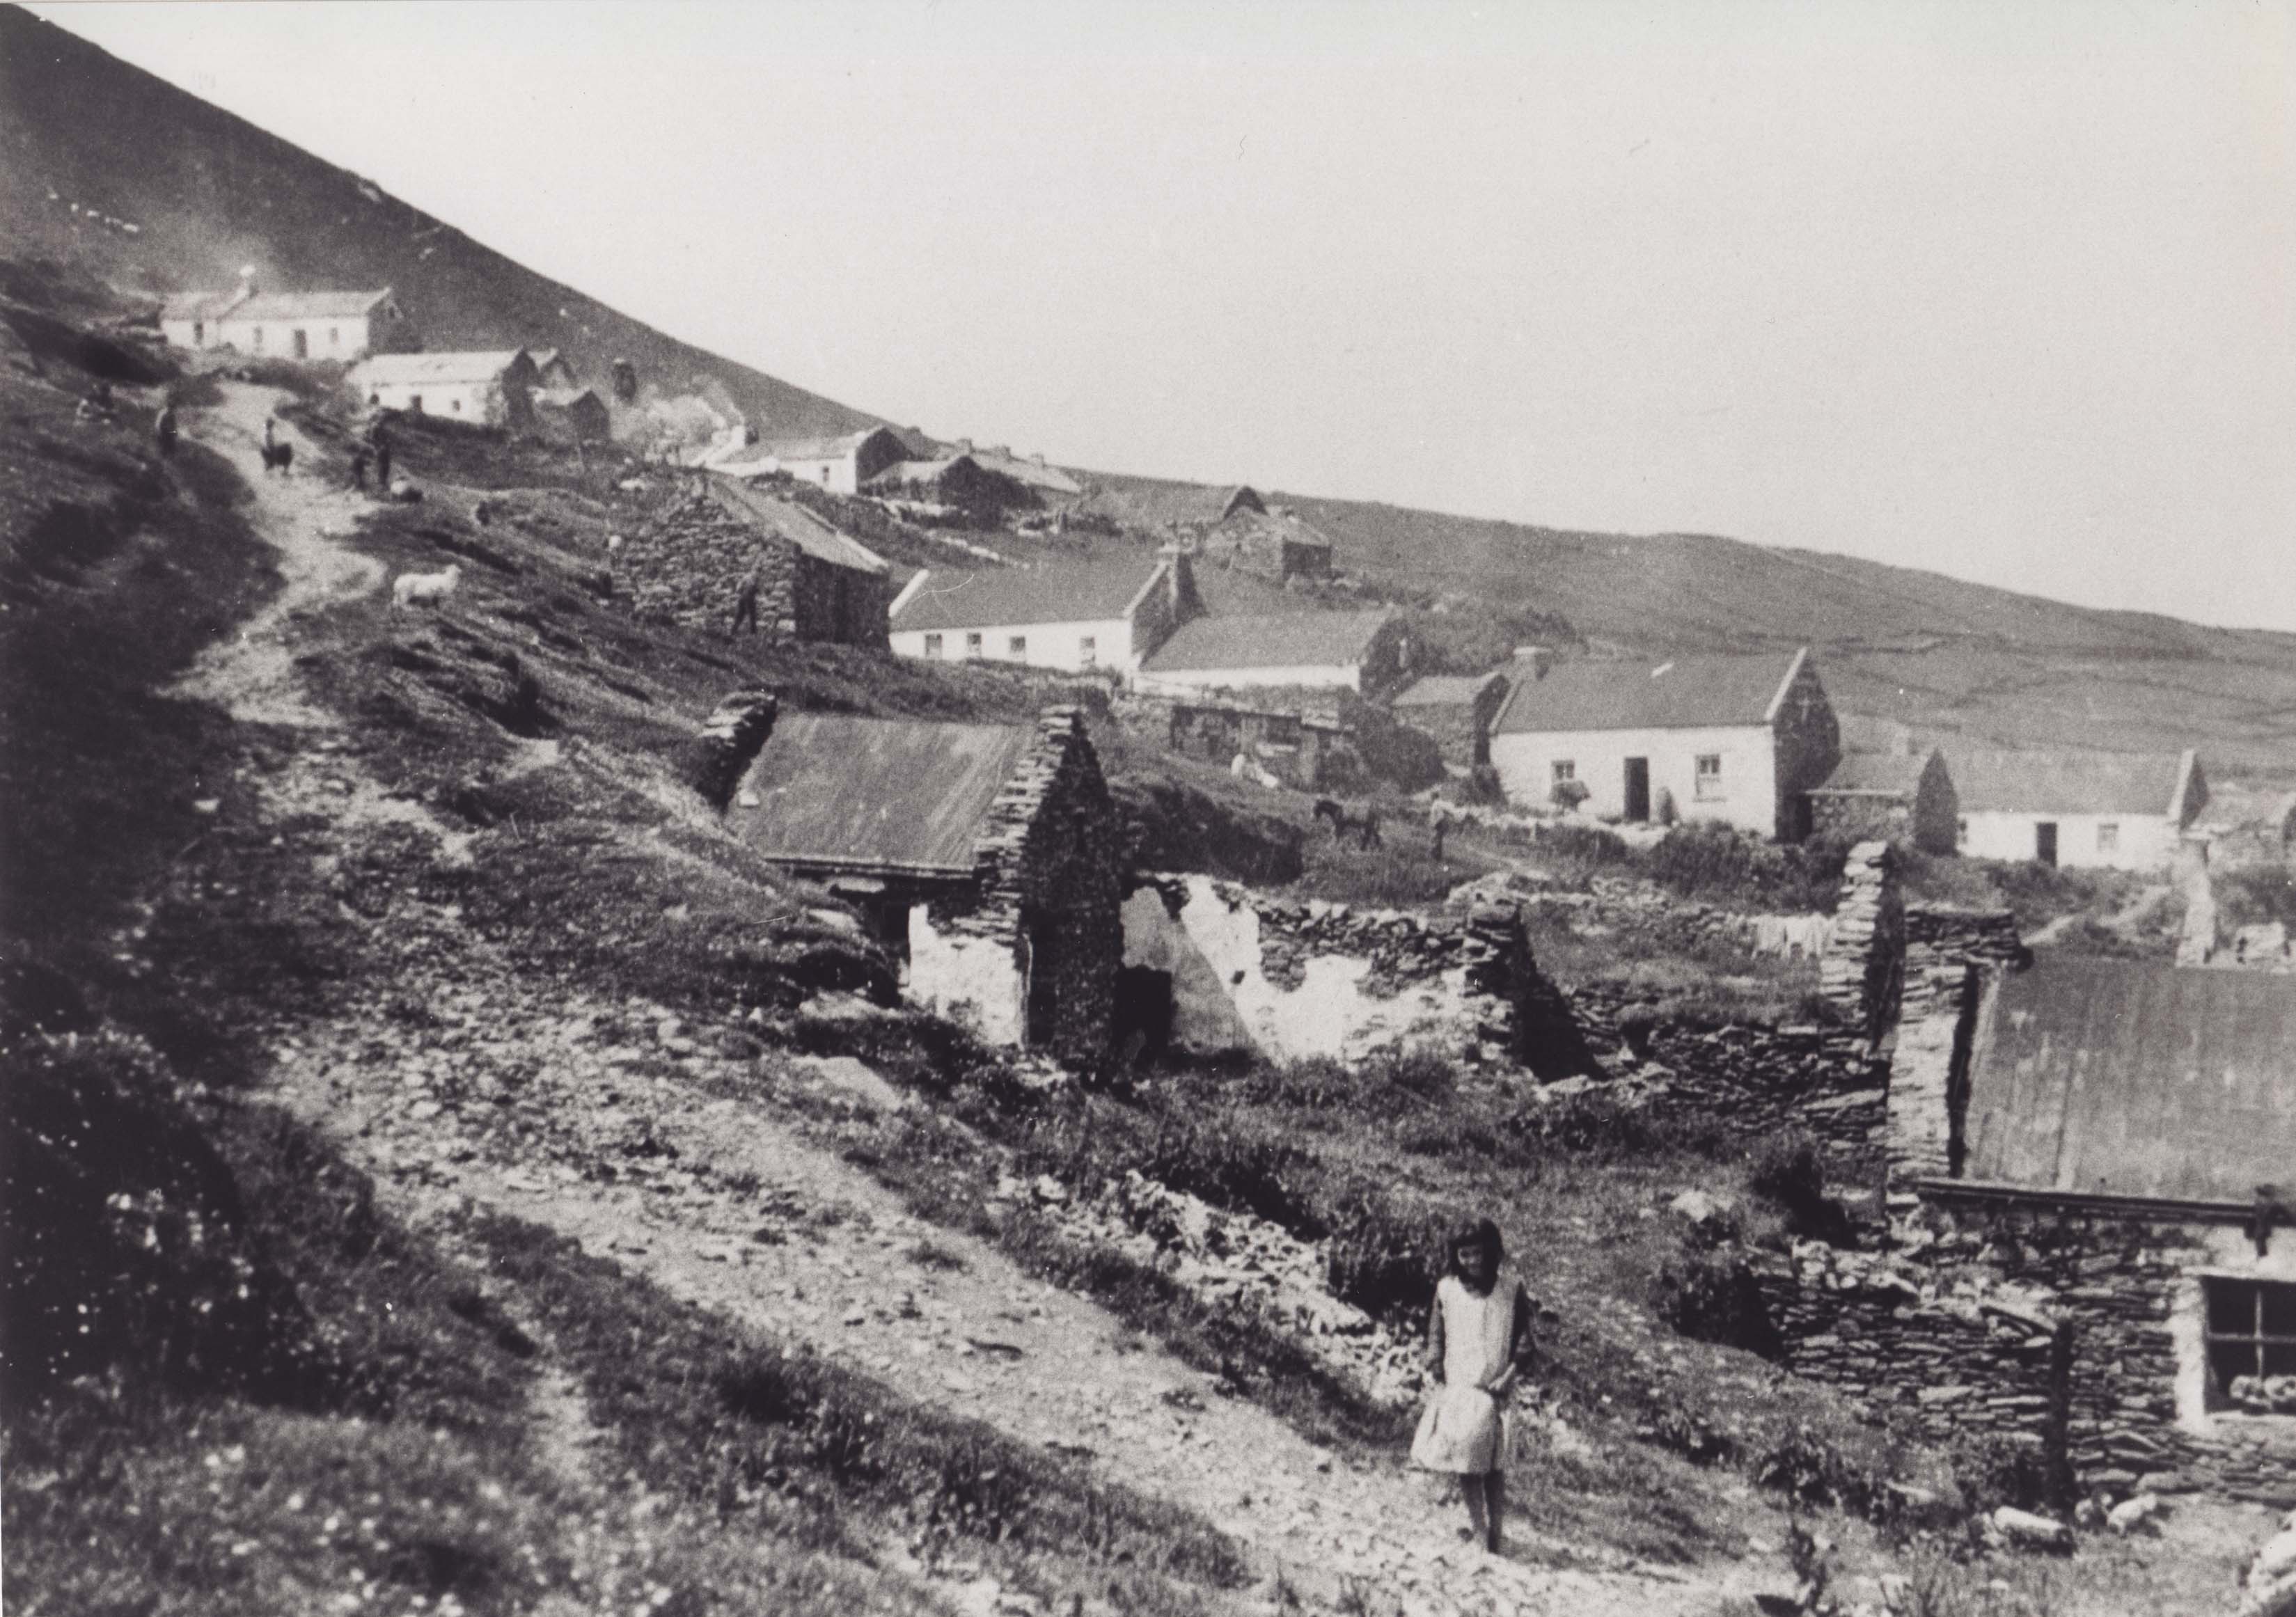 A view of the village in the 1920s. It was in the house in the middle of the photograph, which lies partially in ruin, that Peig Sayers lived when she first married into the island.